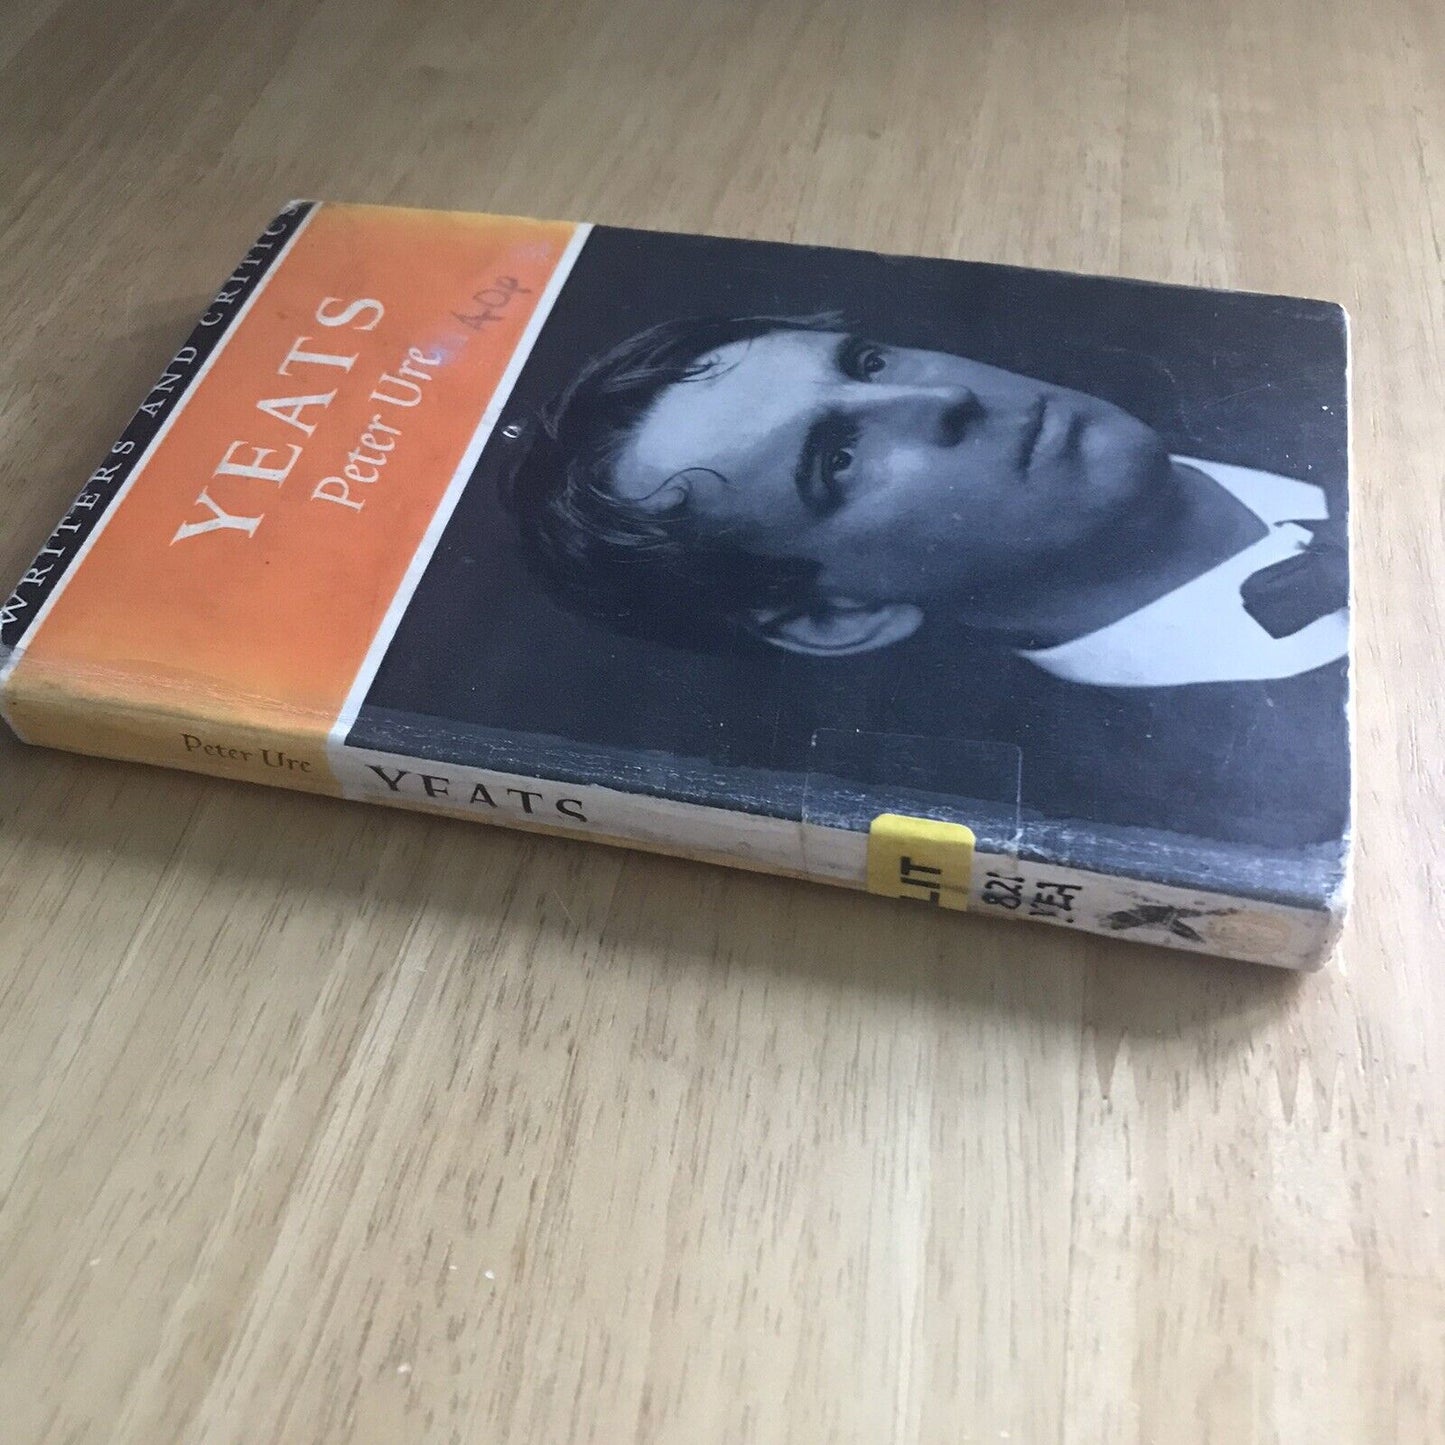 1963*1.* Yeats – Peter Ure(Oliver &amp; Boyd)